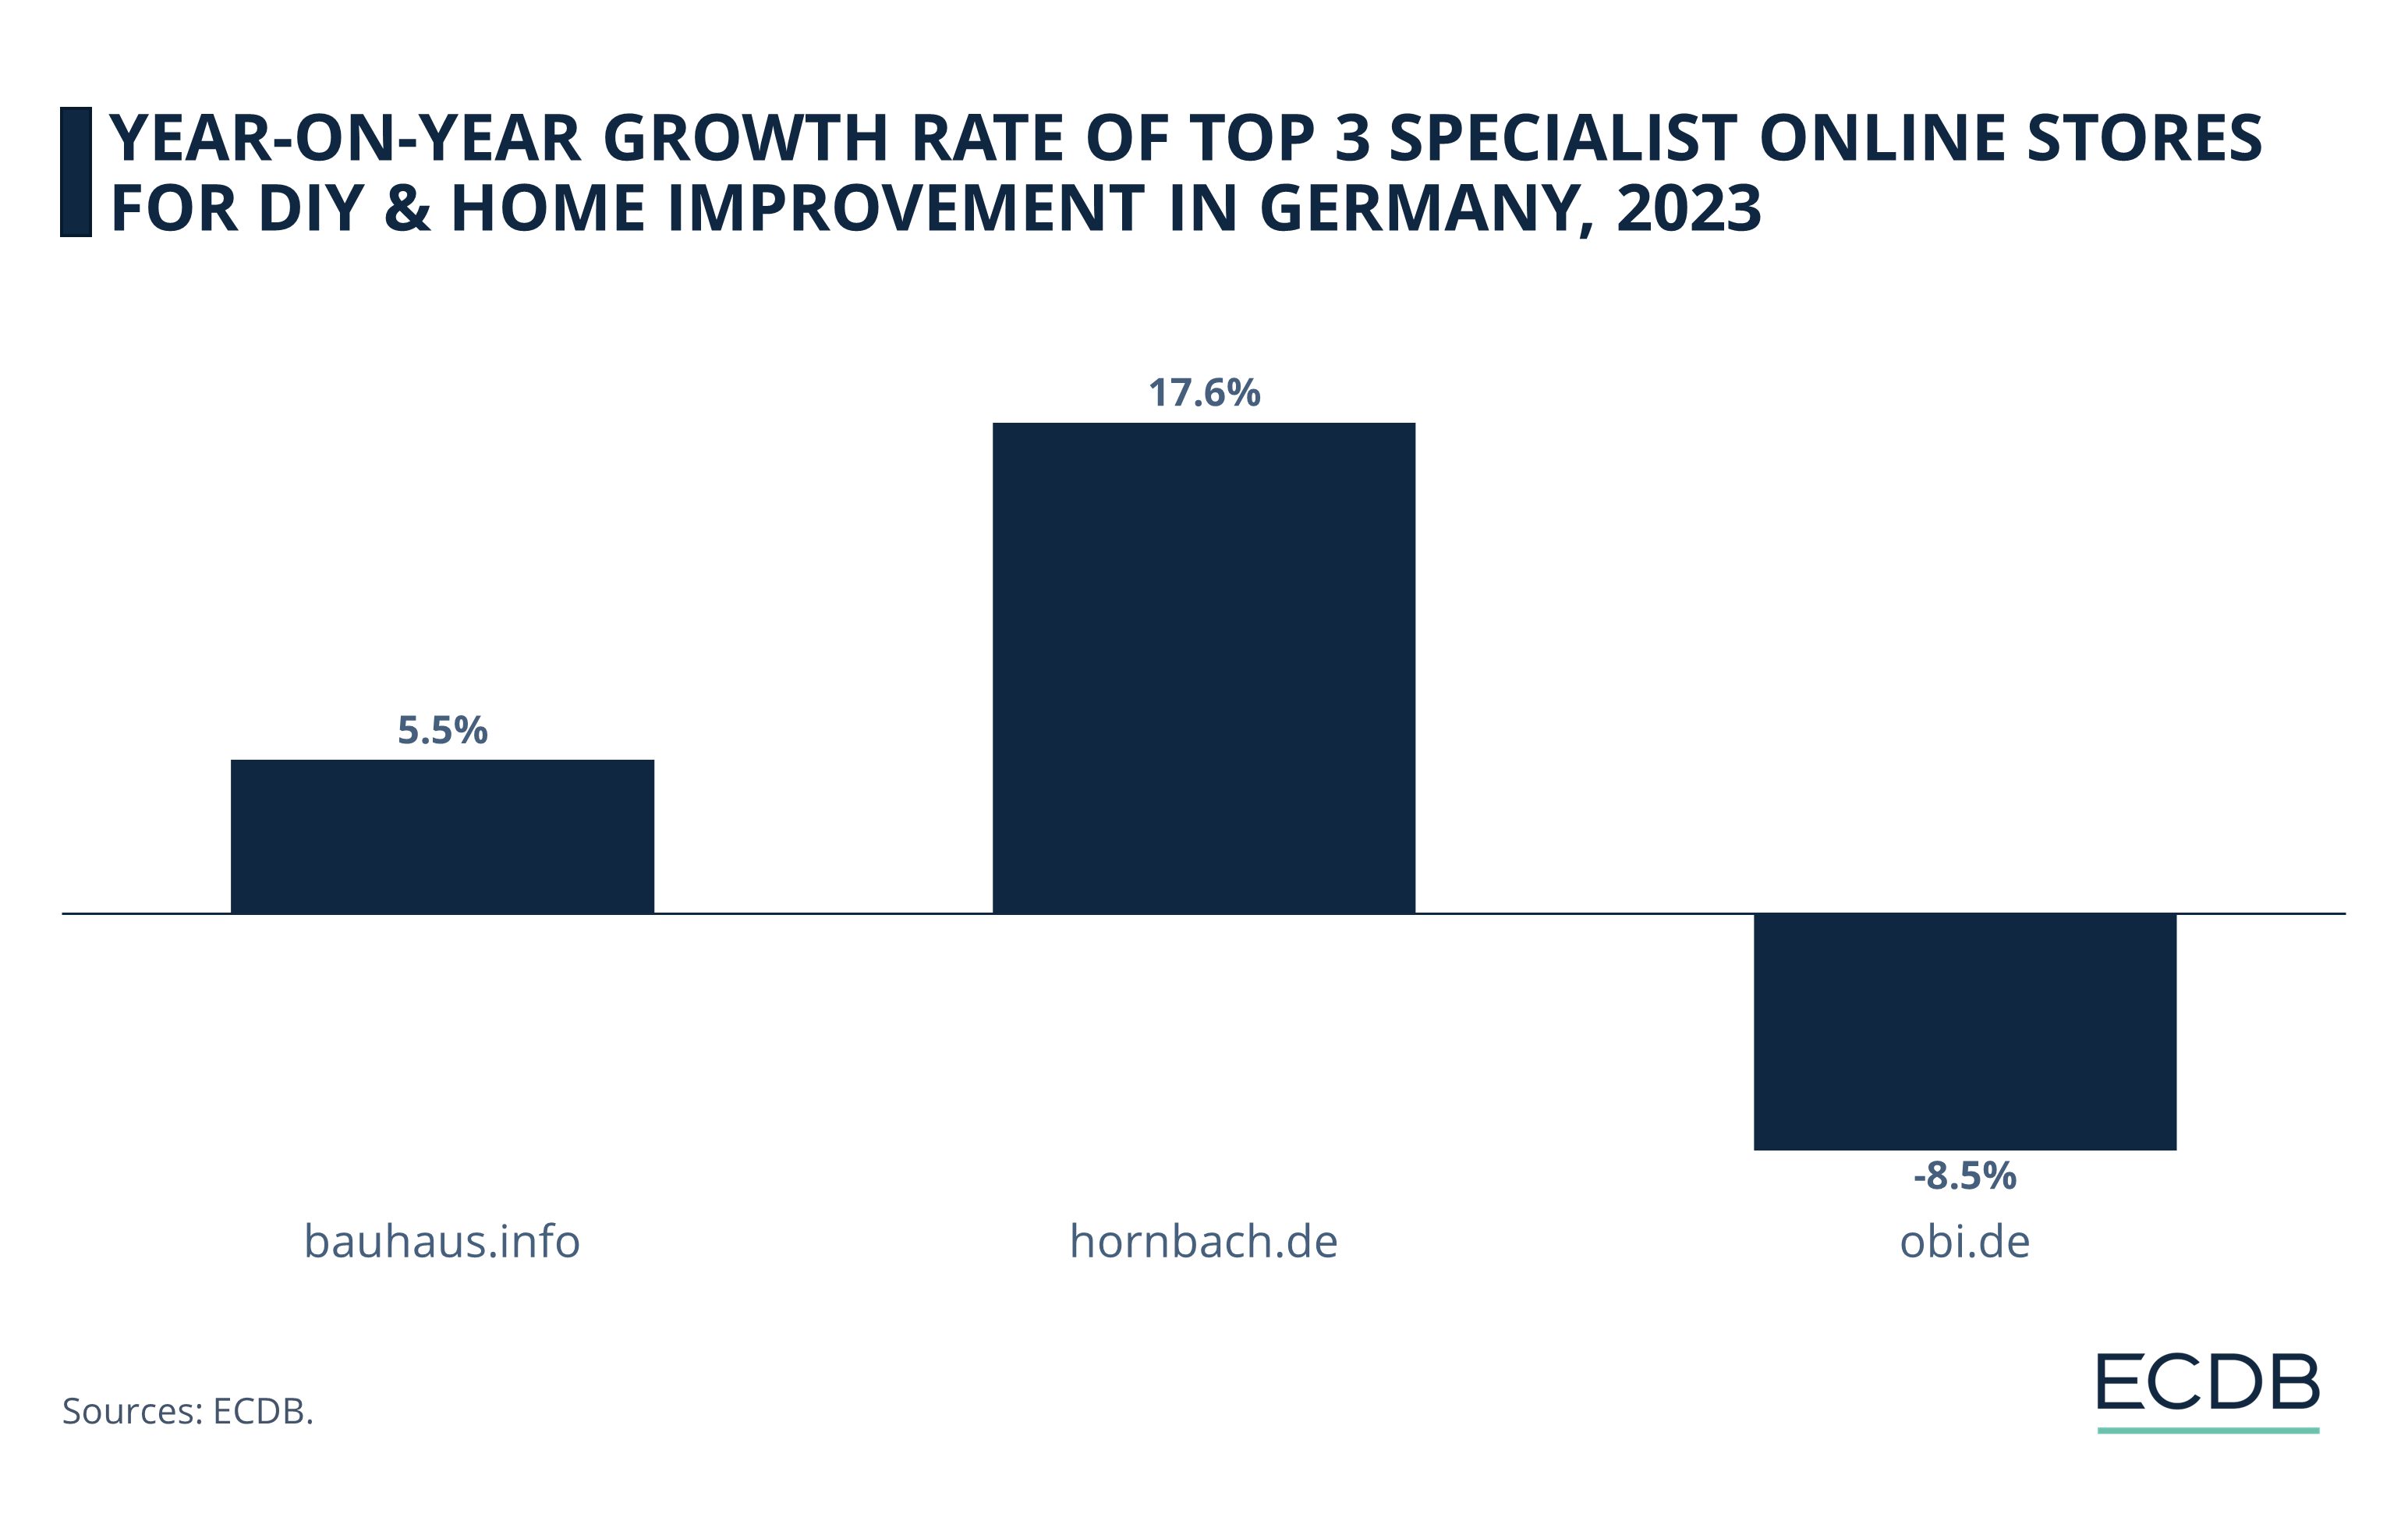 Year-on-Year Growth Rate of Top 3 Specialist Online Stores for DIY & Home Improvement in Germany, 2022